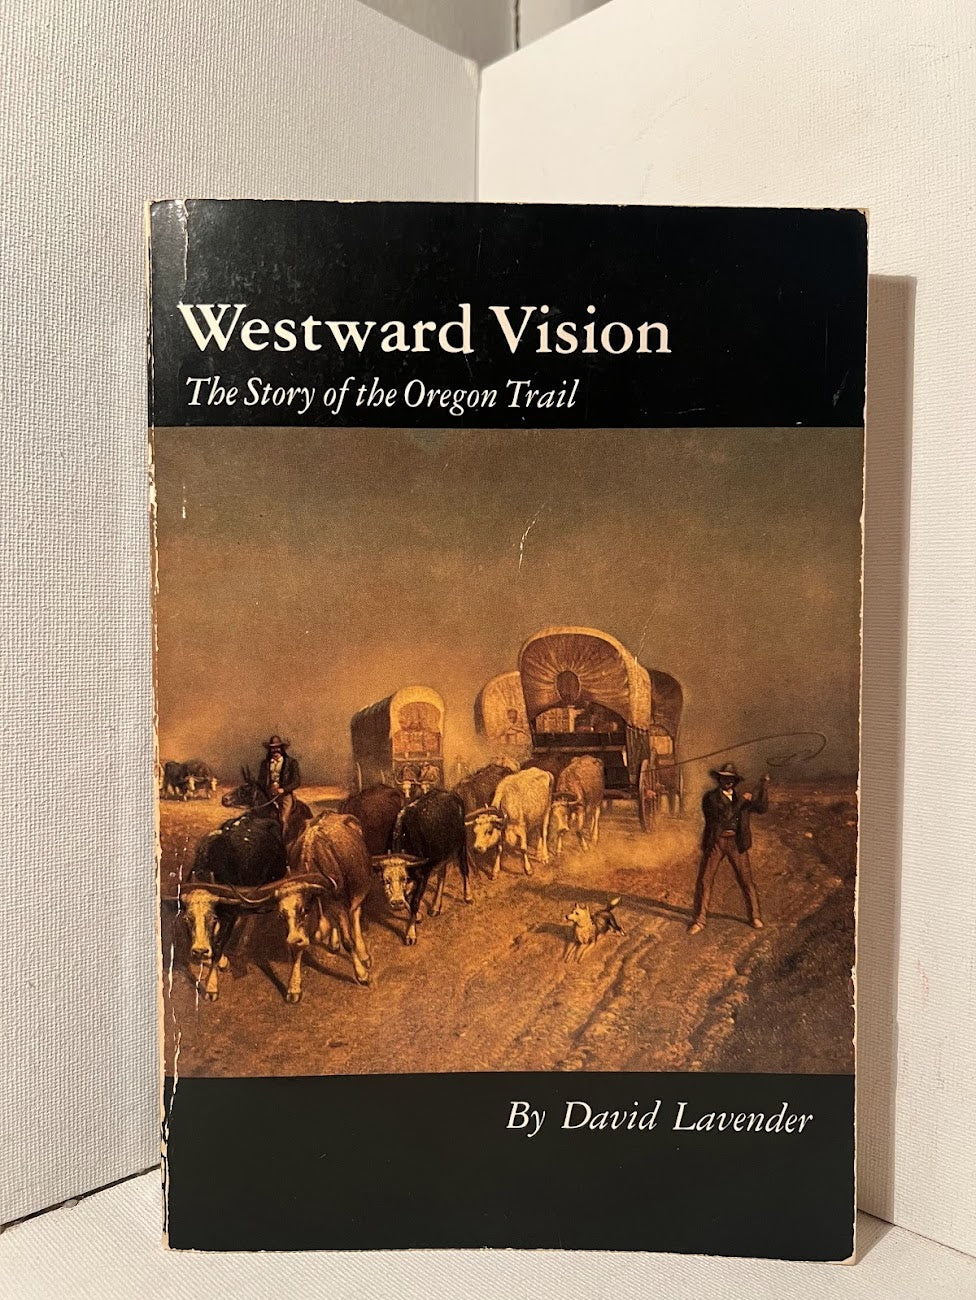 Westward Vision: The Story of the Oregon Trail by David Lavender